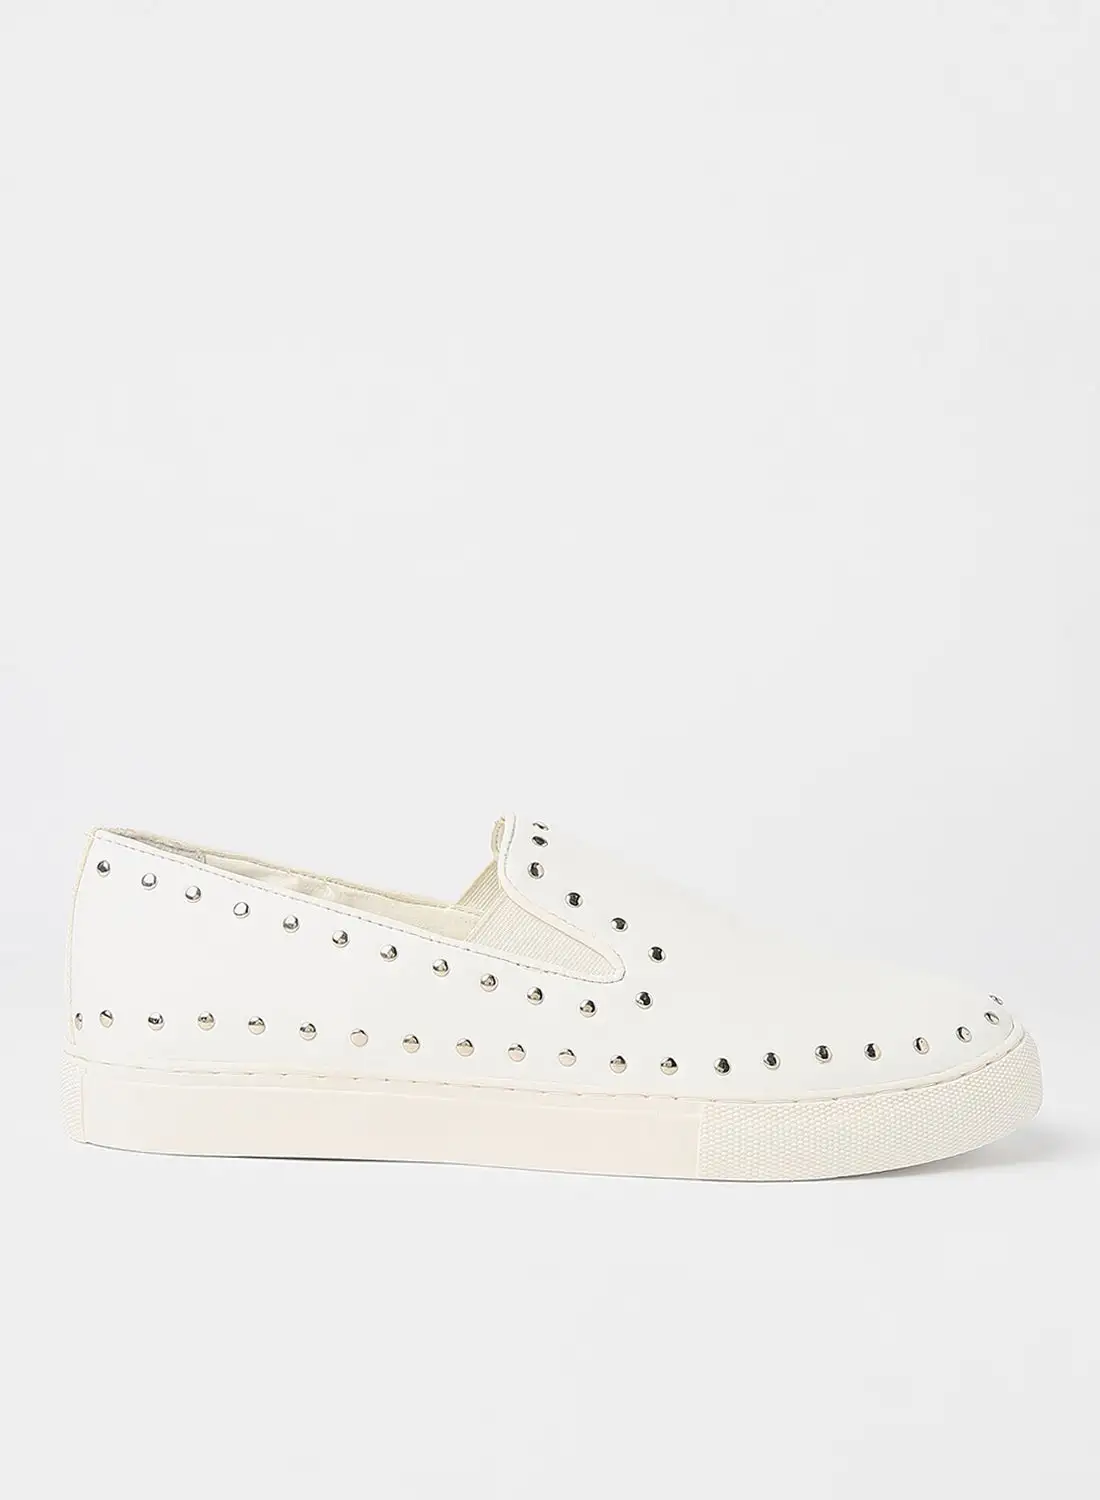 STATE 8 Studded Slip On Sneakers White